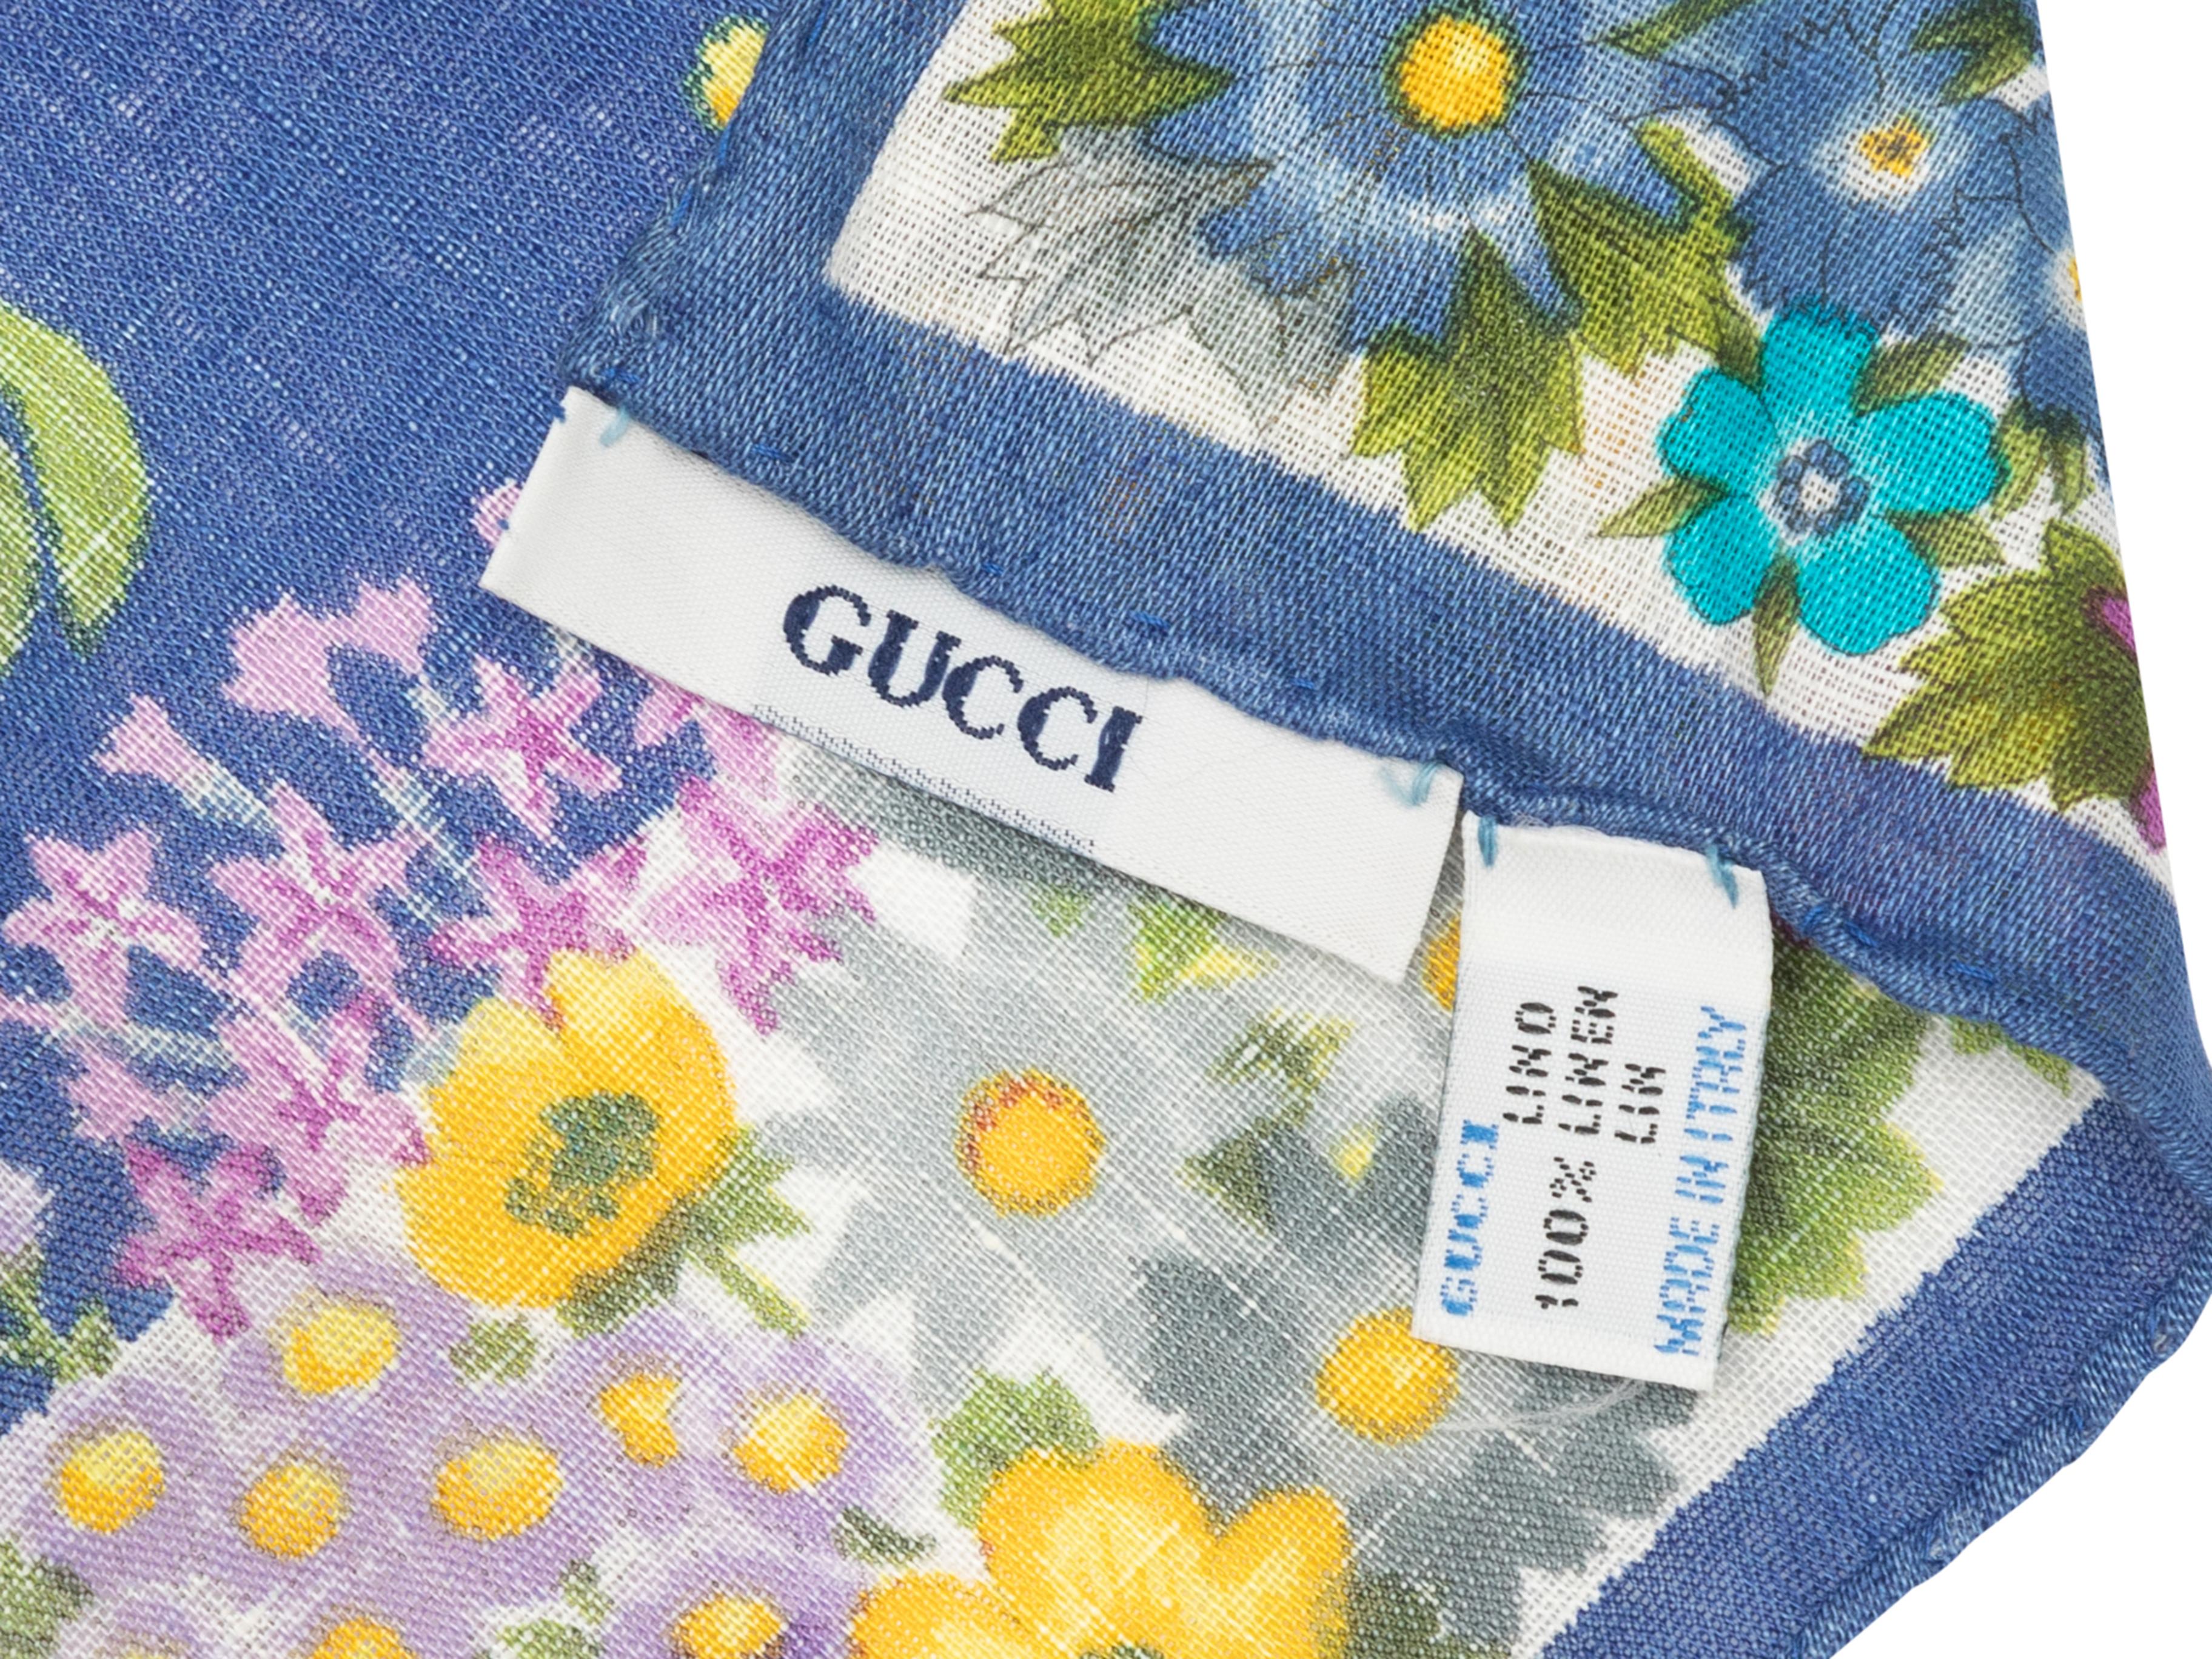 Product Details: Blue and multicolor floral print linen square scarf by Gucci. 33